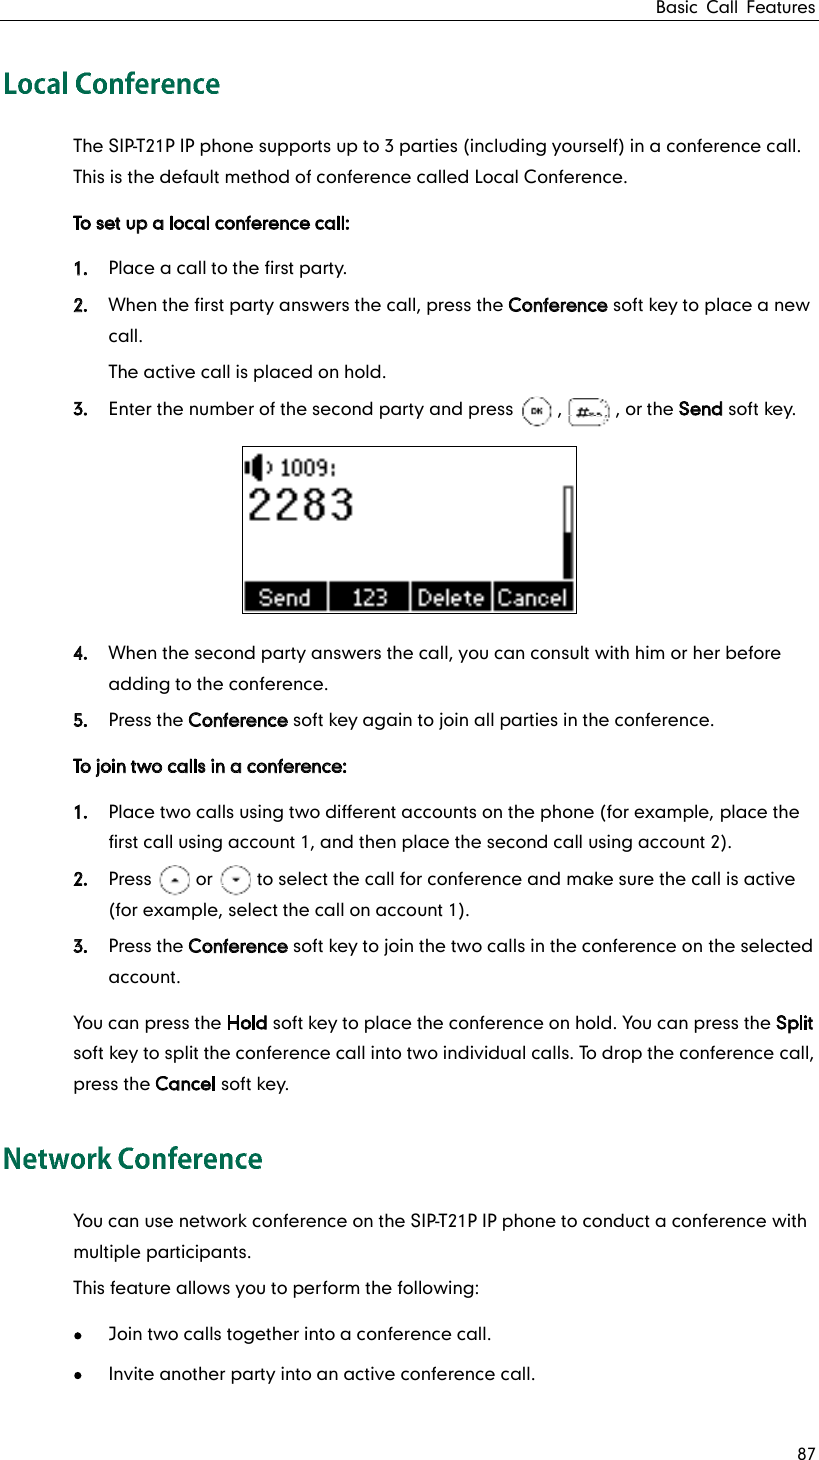 Basic Call Features 87 The SIP-T21P IP phone supports up to 3 parties (including yourself) in a conference call. This is the default method of conference called Local Conference. To set up a local conference call: 1. Place a call to the first party. 2. When the first party answers the call, press the Conference soft key to place a new call. The active call is placed on hold. 3. Enter the number of the second party and press     ,      , or the Send soft key.  4. When the second party answers the call, you can consult with him or her before adding to the conference. 5. Press the Conference soft key again to join all parties in the conference. To join two calls in a conference: 1. Place two calls using two different accounts on the phone (for example, place the first call using account 1, and then place the second call using account 2). 2. Press     or     to select the call for conference and make sure the call is active (for example, select the call on account 1). 3. Press the Conference soft key to join the two calls in the conference on the selected account. You can press the Hold soft key to place the conference on hold. You can press the Split soft key to split the conference call into two individual calls. To drop the conference call, press the Cancel soft key. You can use network conference on the SIP-T21P IP phone to conduct a conference with multiple participants. This feature allows you to perform the following:  Join two calls together into a conference call.  Invite another party into an active conference call. 